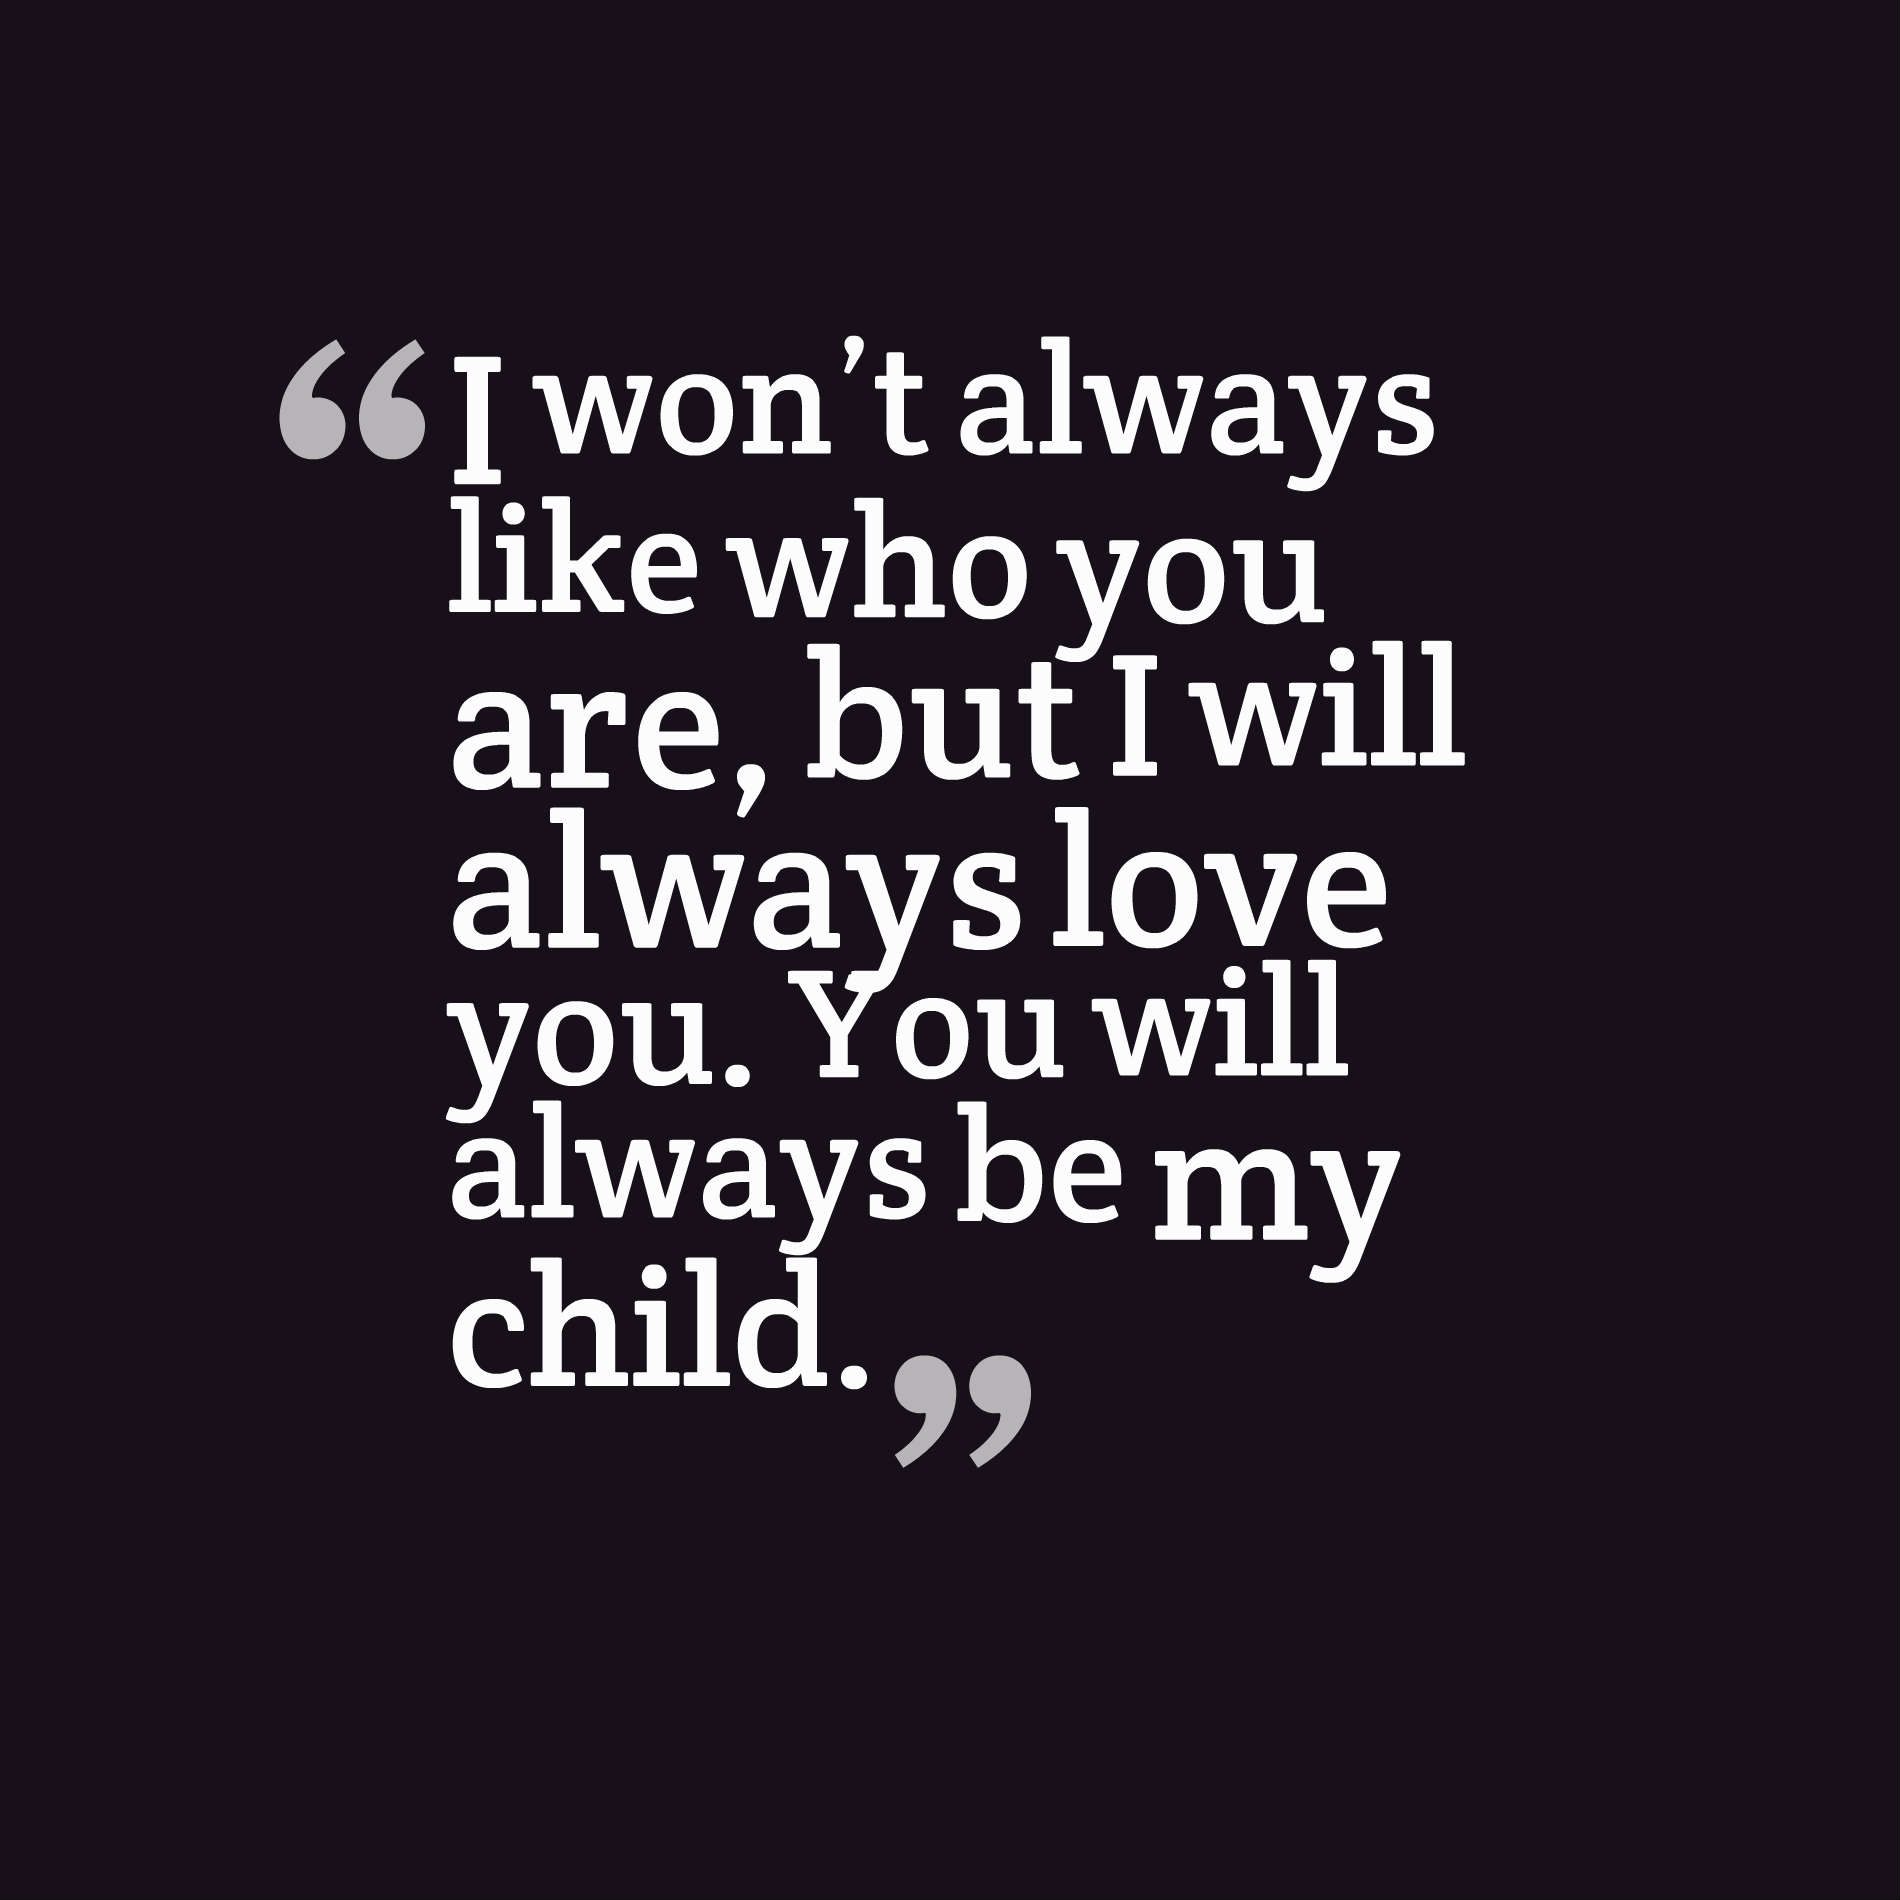 I won’t always like who you are, but I will always love you. You will always be my child.